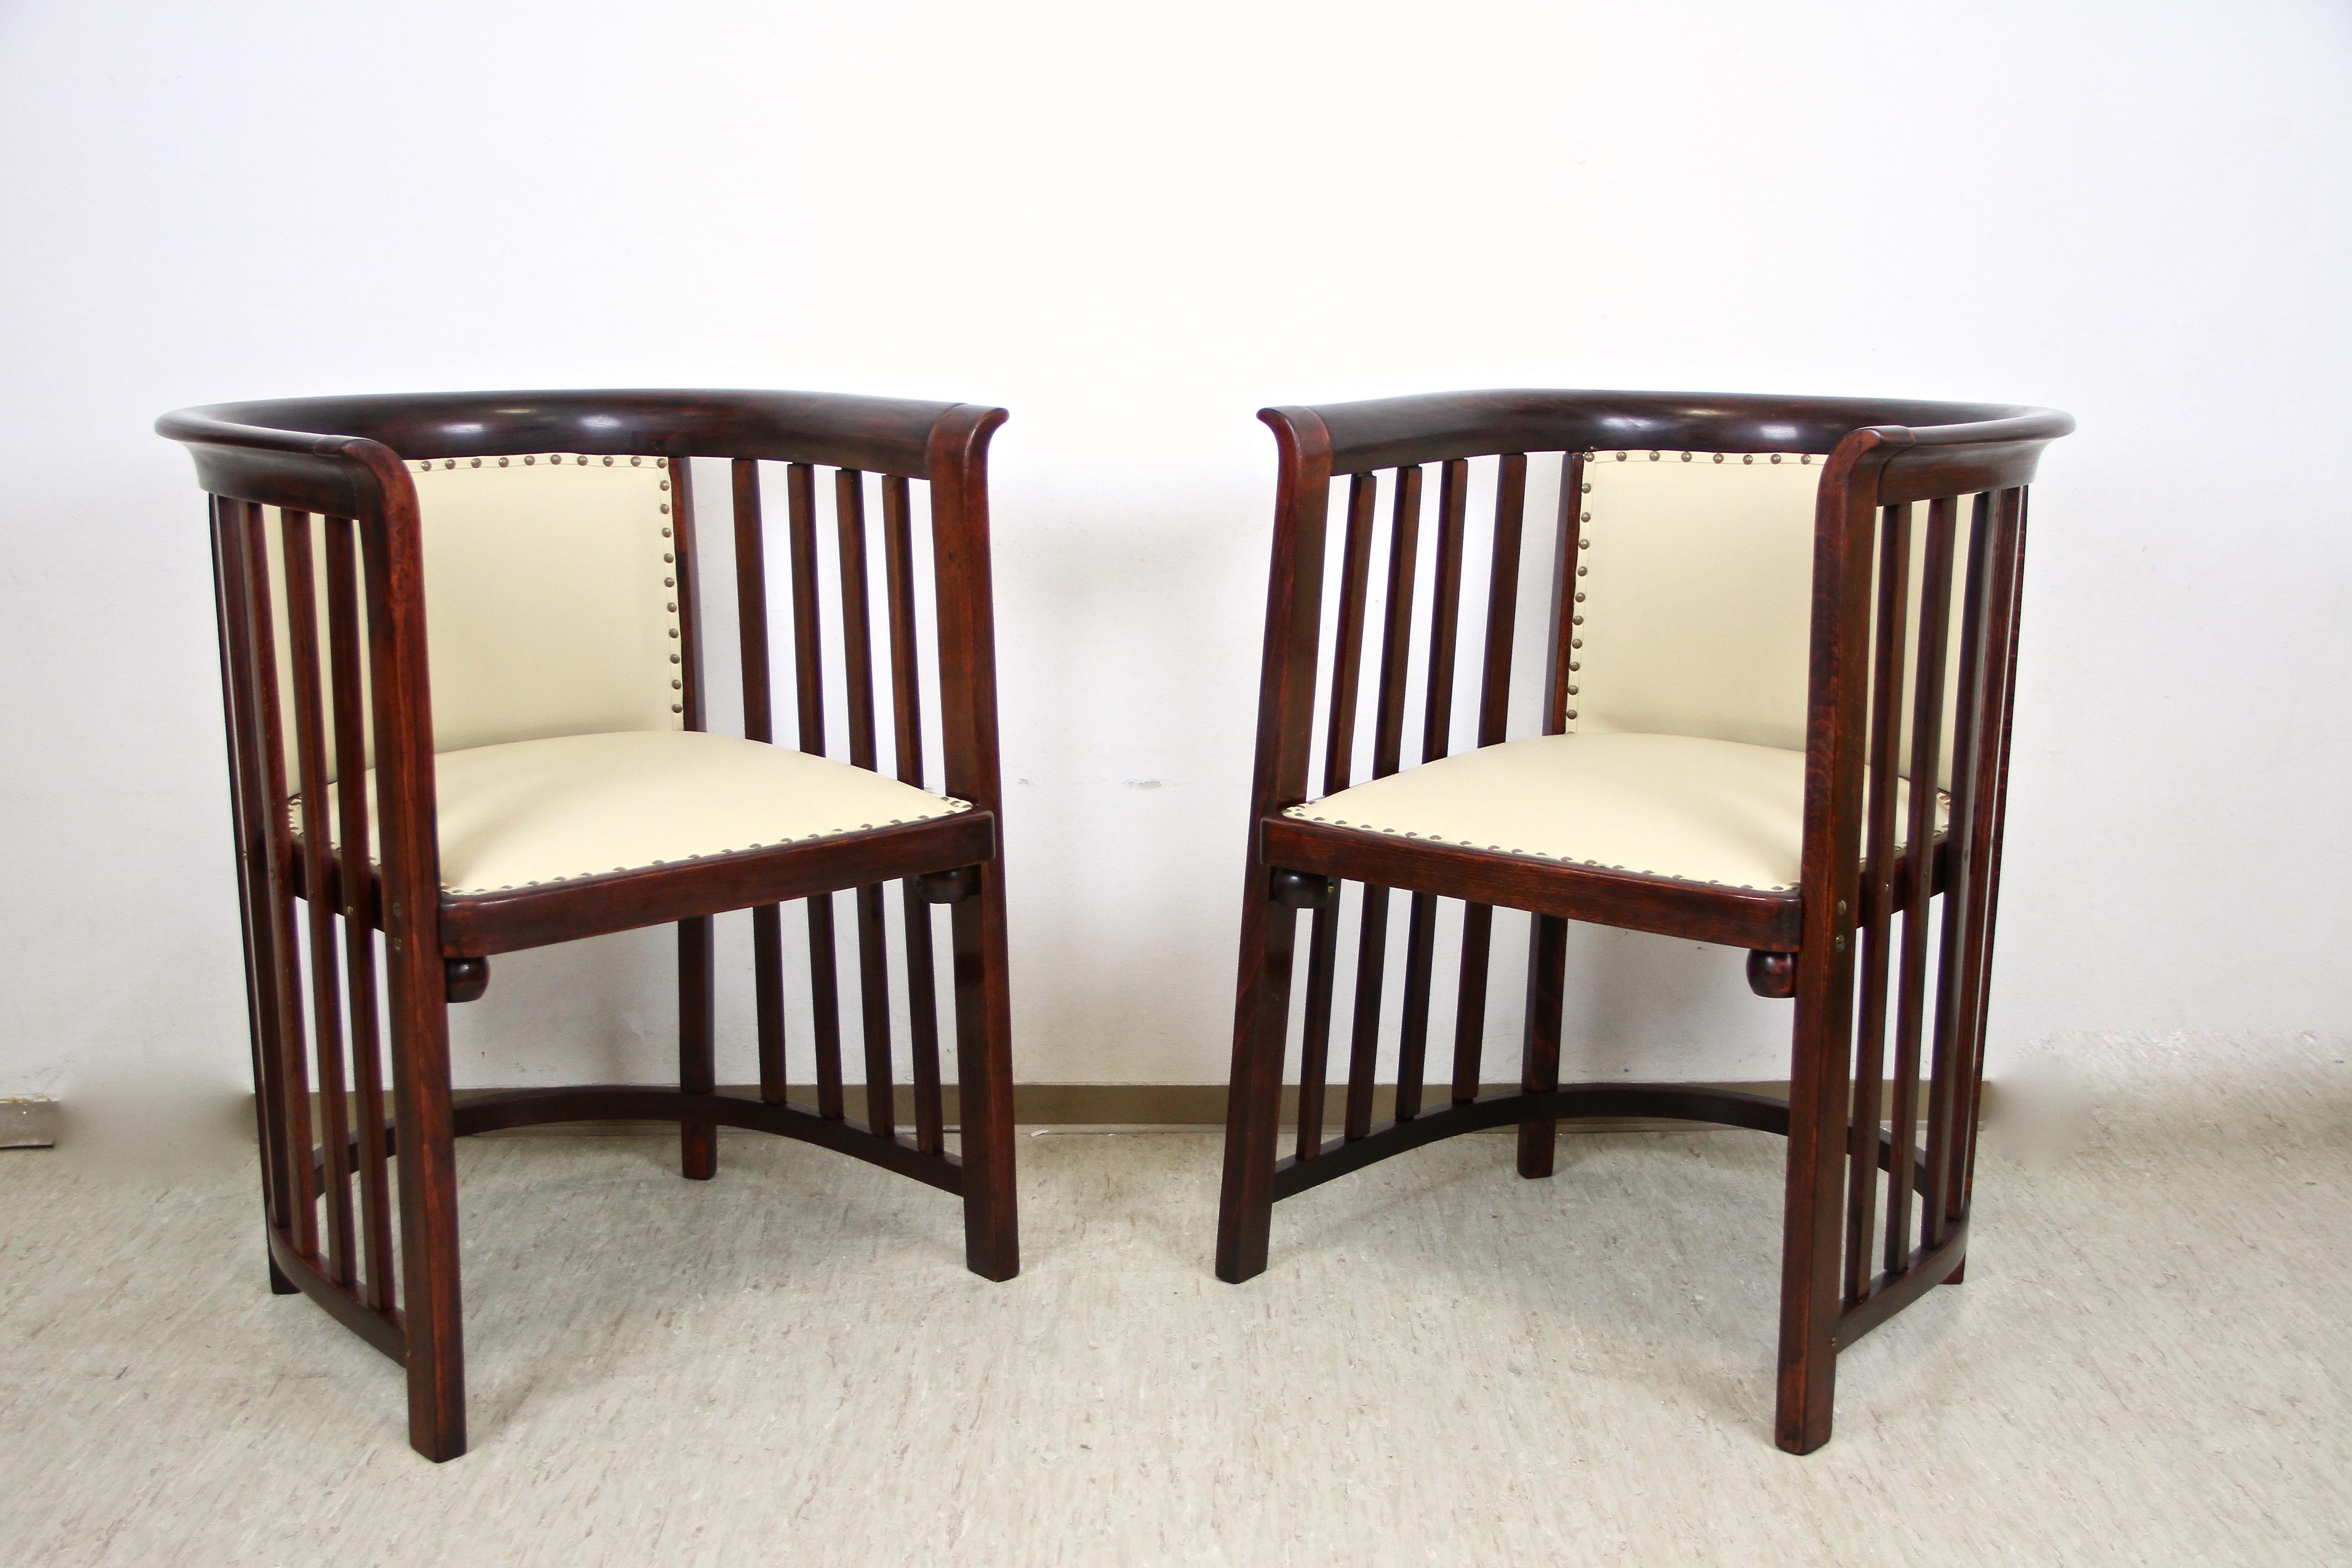 Beautiful pair of bentwood armchairs mod. 423/F designed by famous Austrian architect Josef Hoffmann (who is also well known as founding member of the world renown 